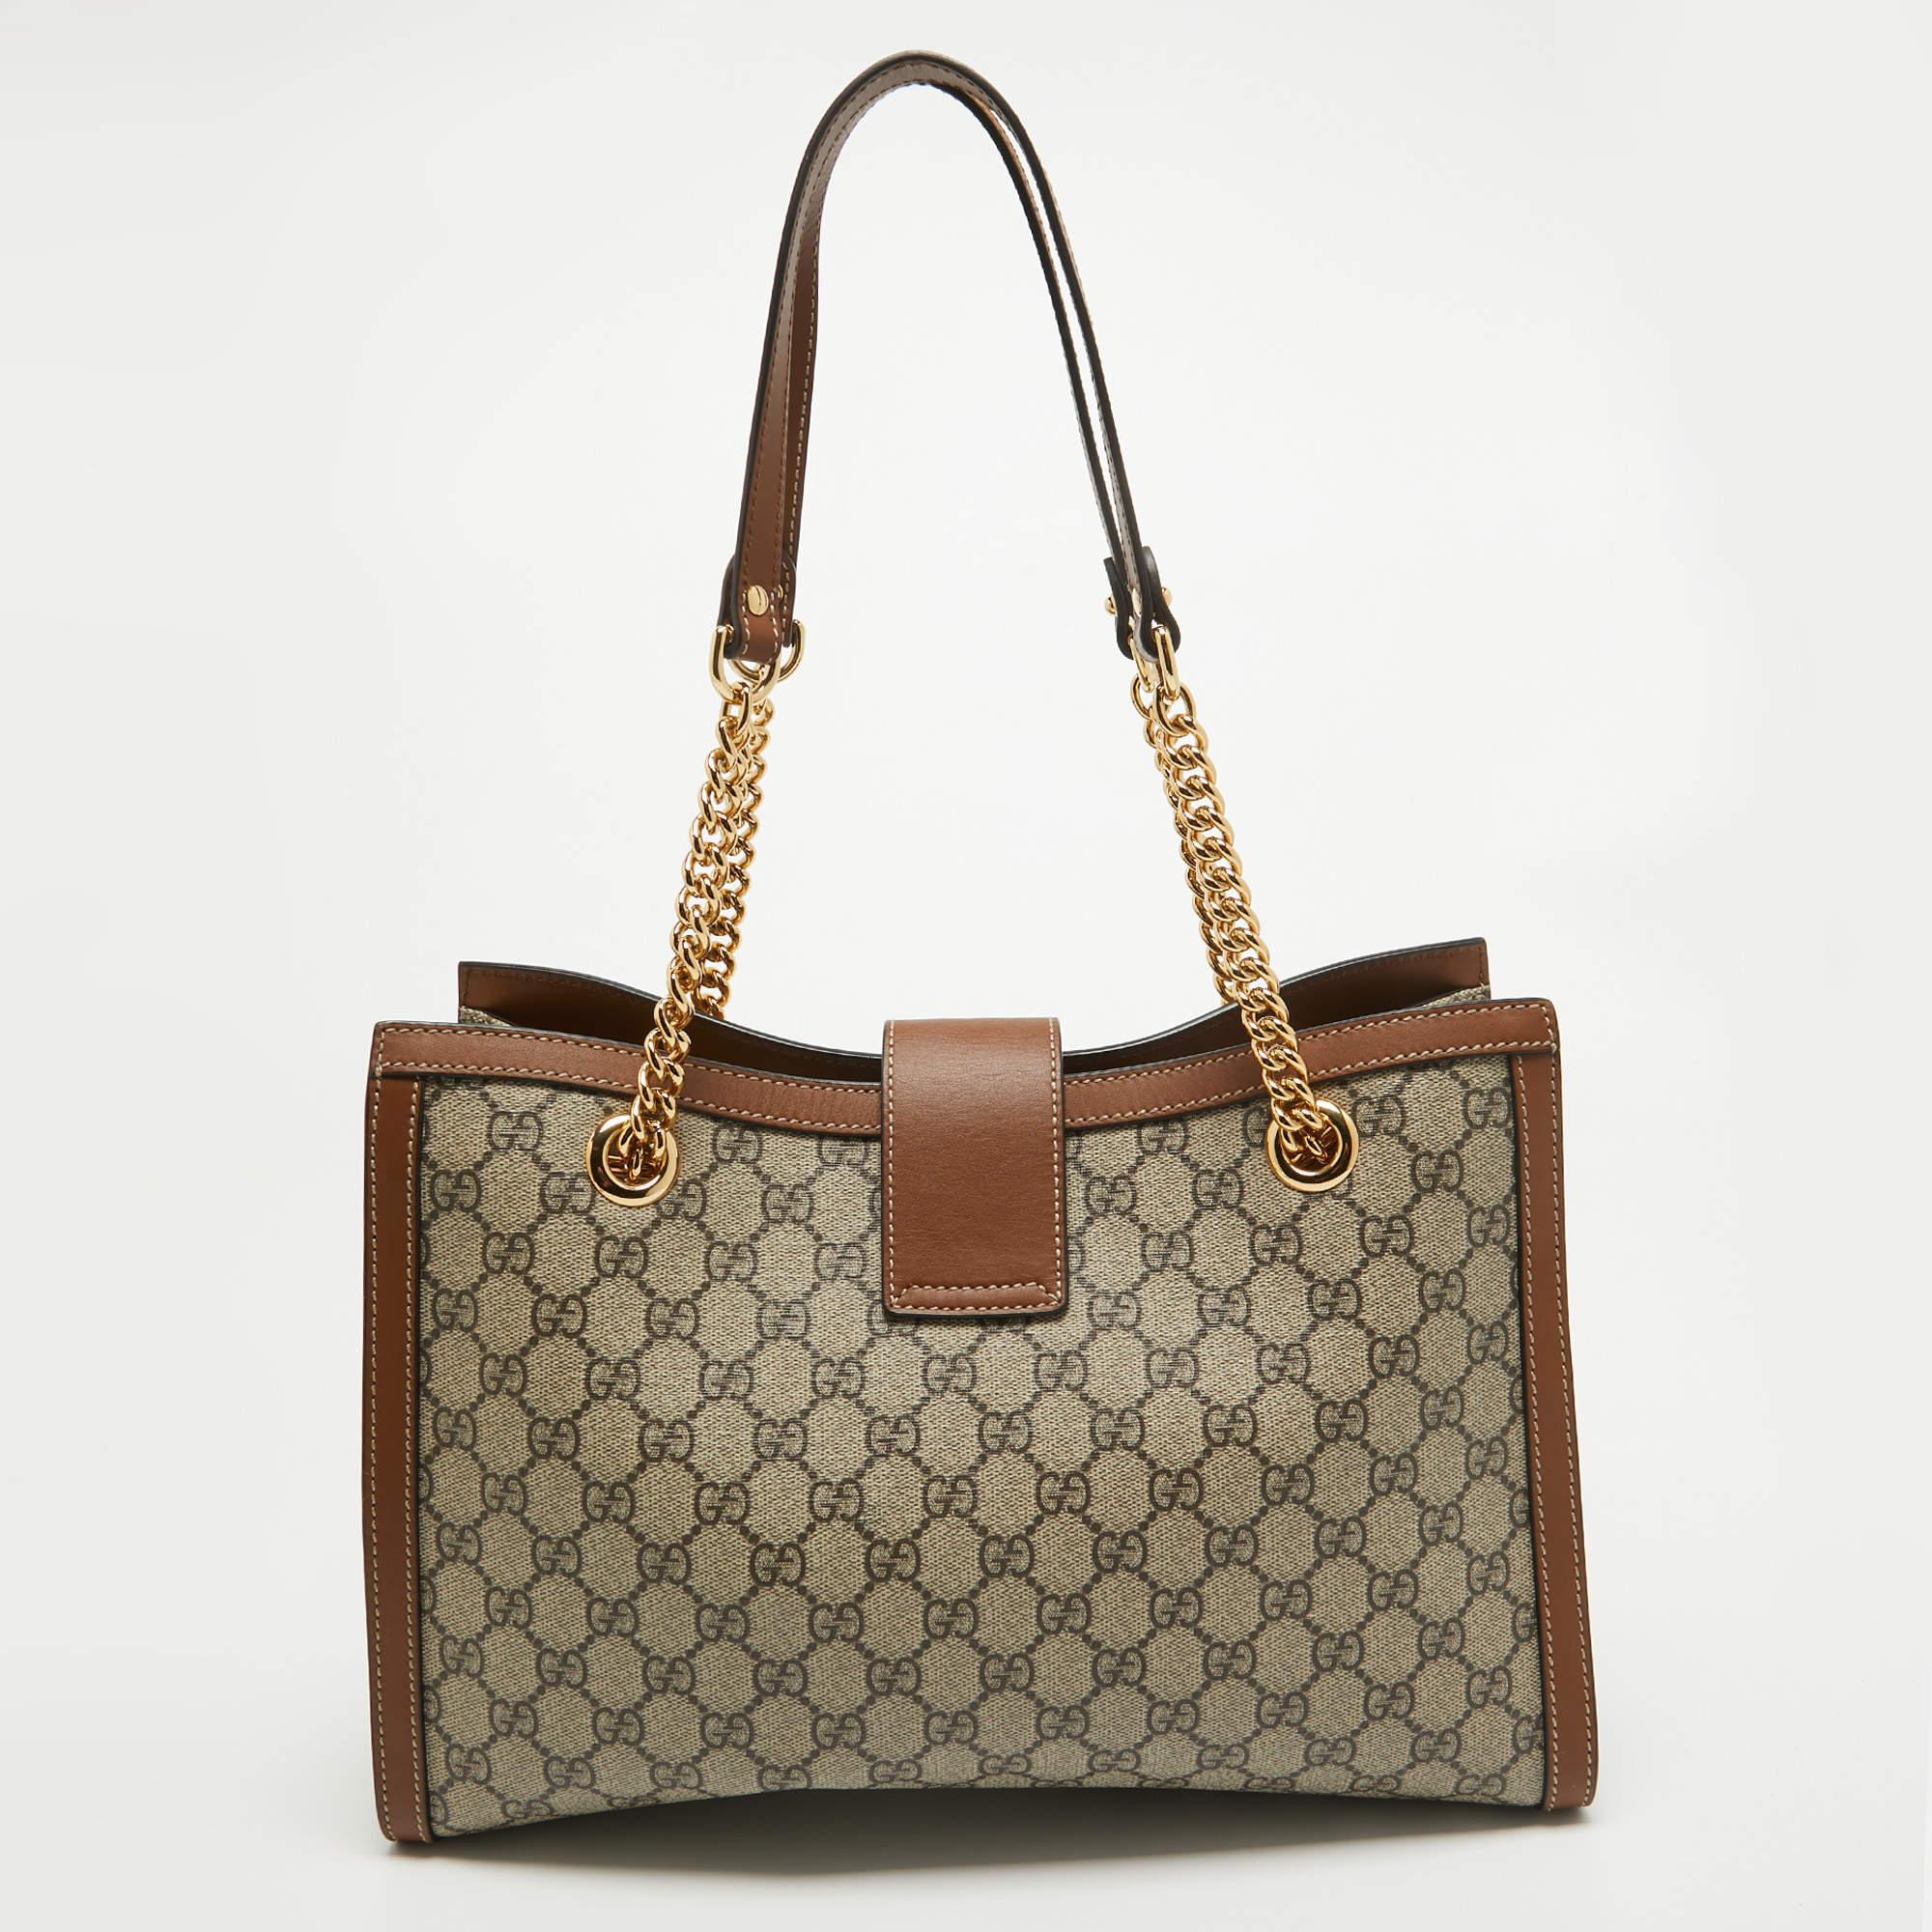 Know to create stylish, sophisticated, and timeless designs, this is a brand worth investing in. The bags that come from this Gucci's atelier are exquisite. This tote bag is no different. It has been made from quality materials and comes with an